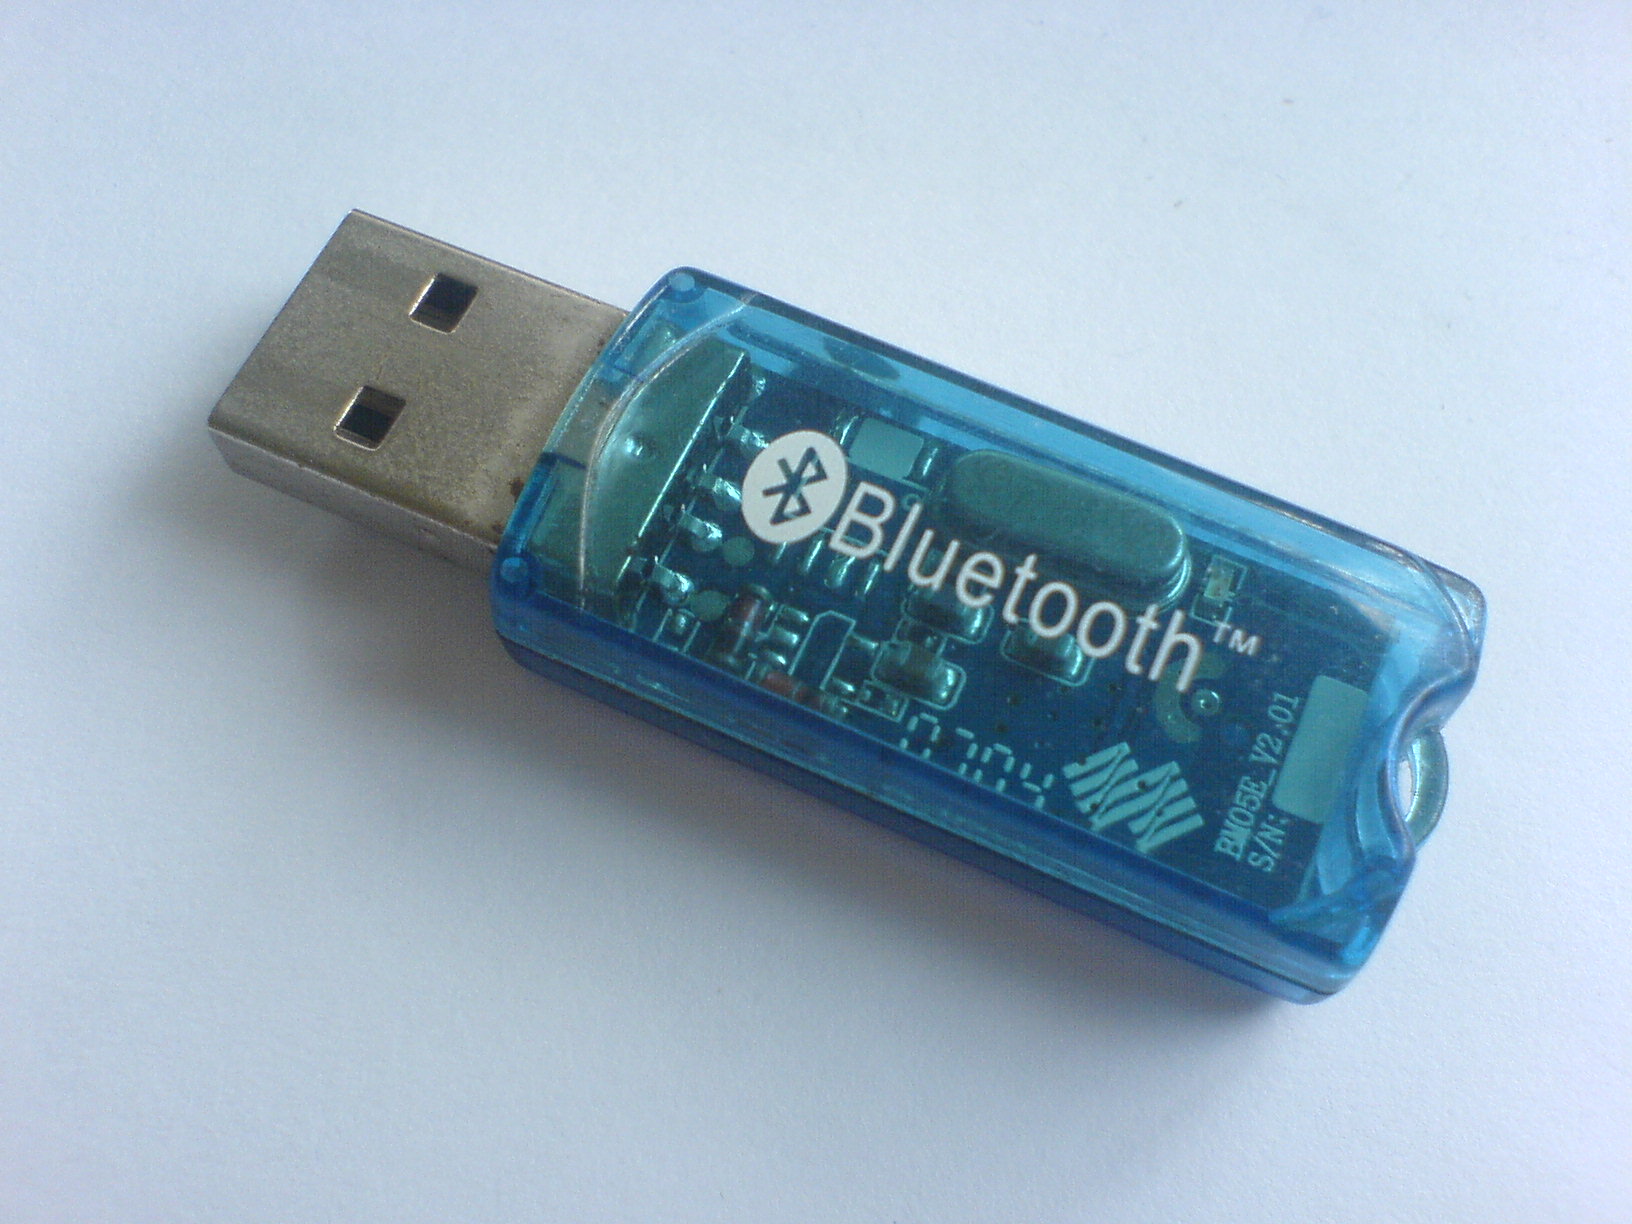 Bluesoleil bluetooth dongle driver free download